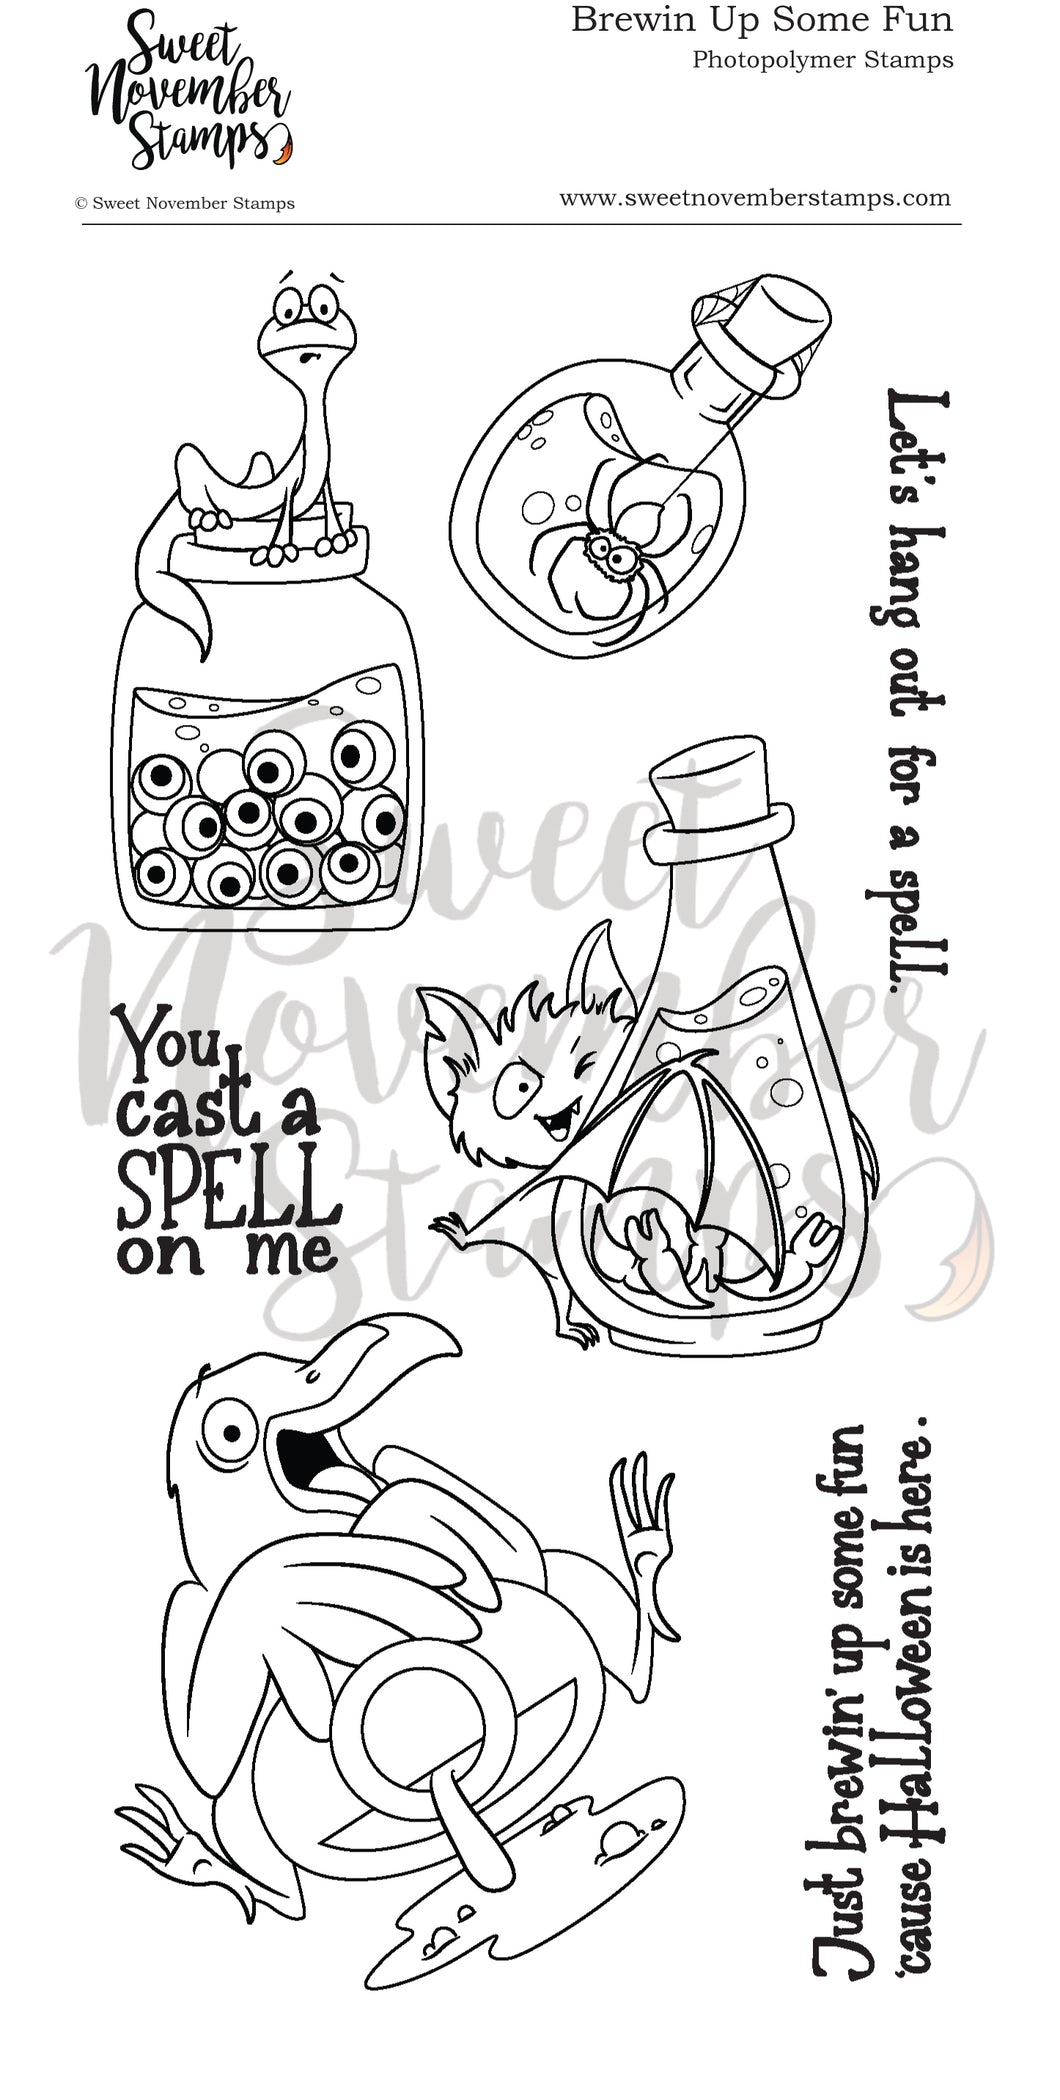 Clear Stamp Set - Brewin Up Some Fun